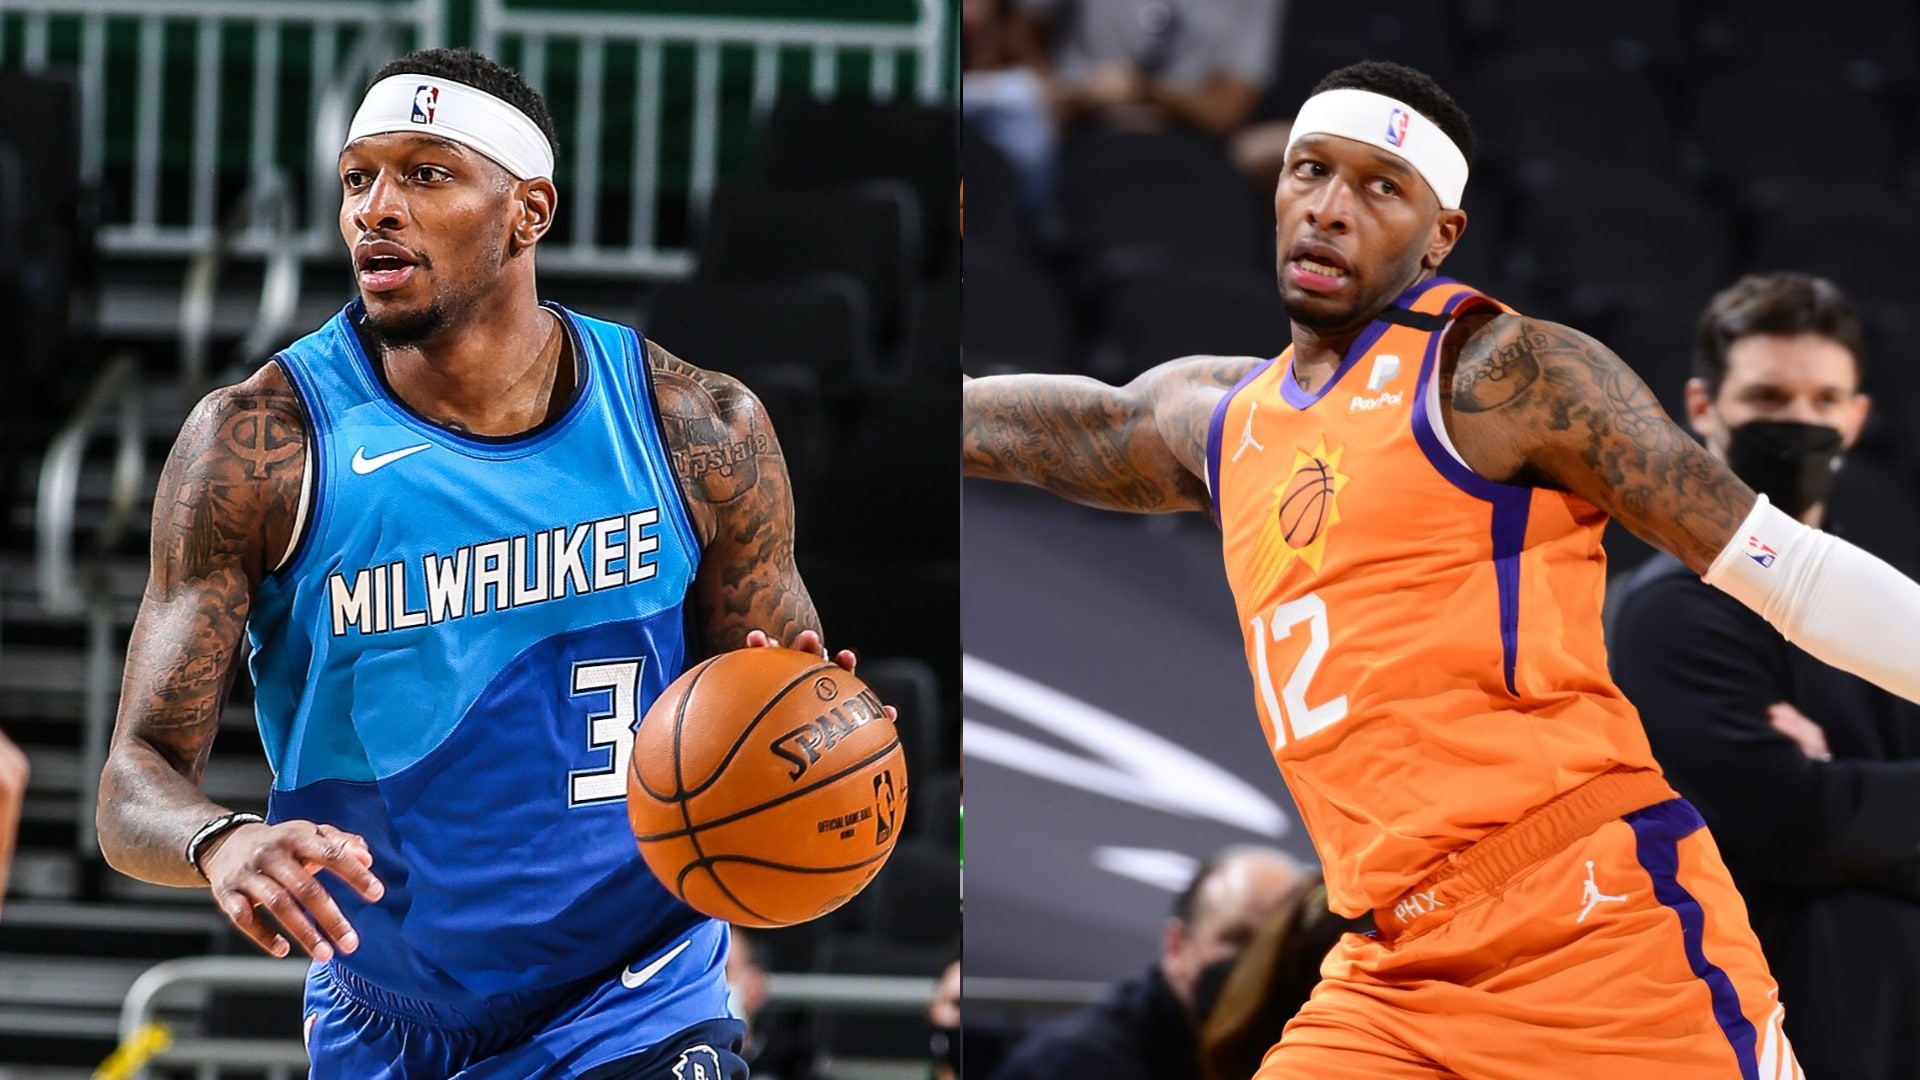 SB Nation on X: Torrey Craig is now a 2021 NBA Champion! The